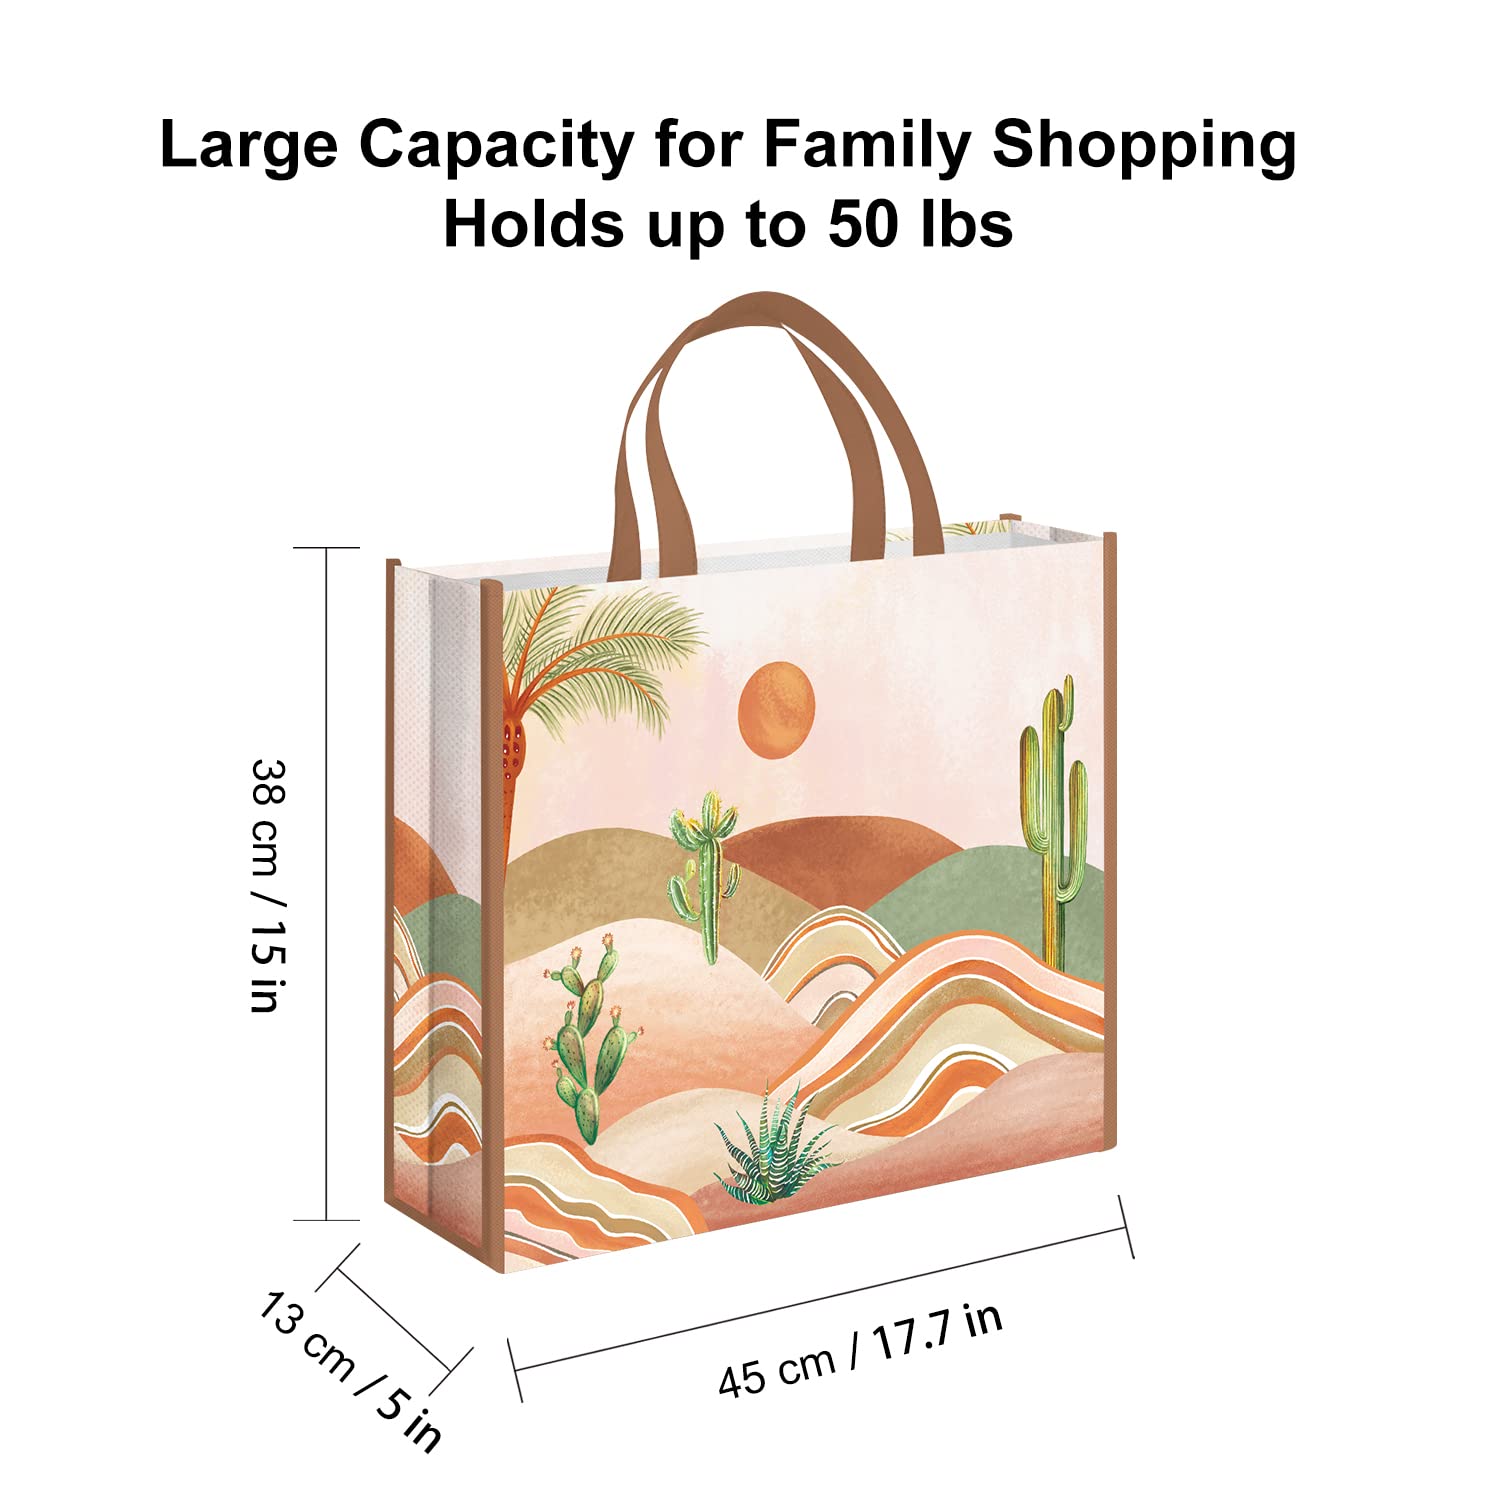 NymphFable 5 Pack Gift Bags Medium 17.7 * 15 * 5 inches Reusable Party Gift Bags Tote Bags for Birthday Wedding Party Favour Present Wrap with Handles